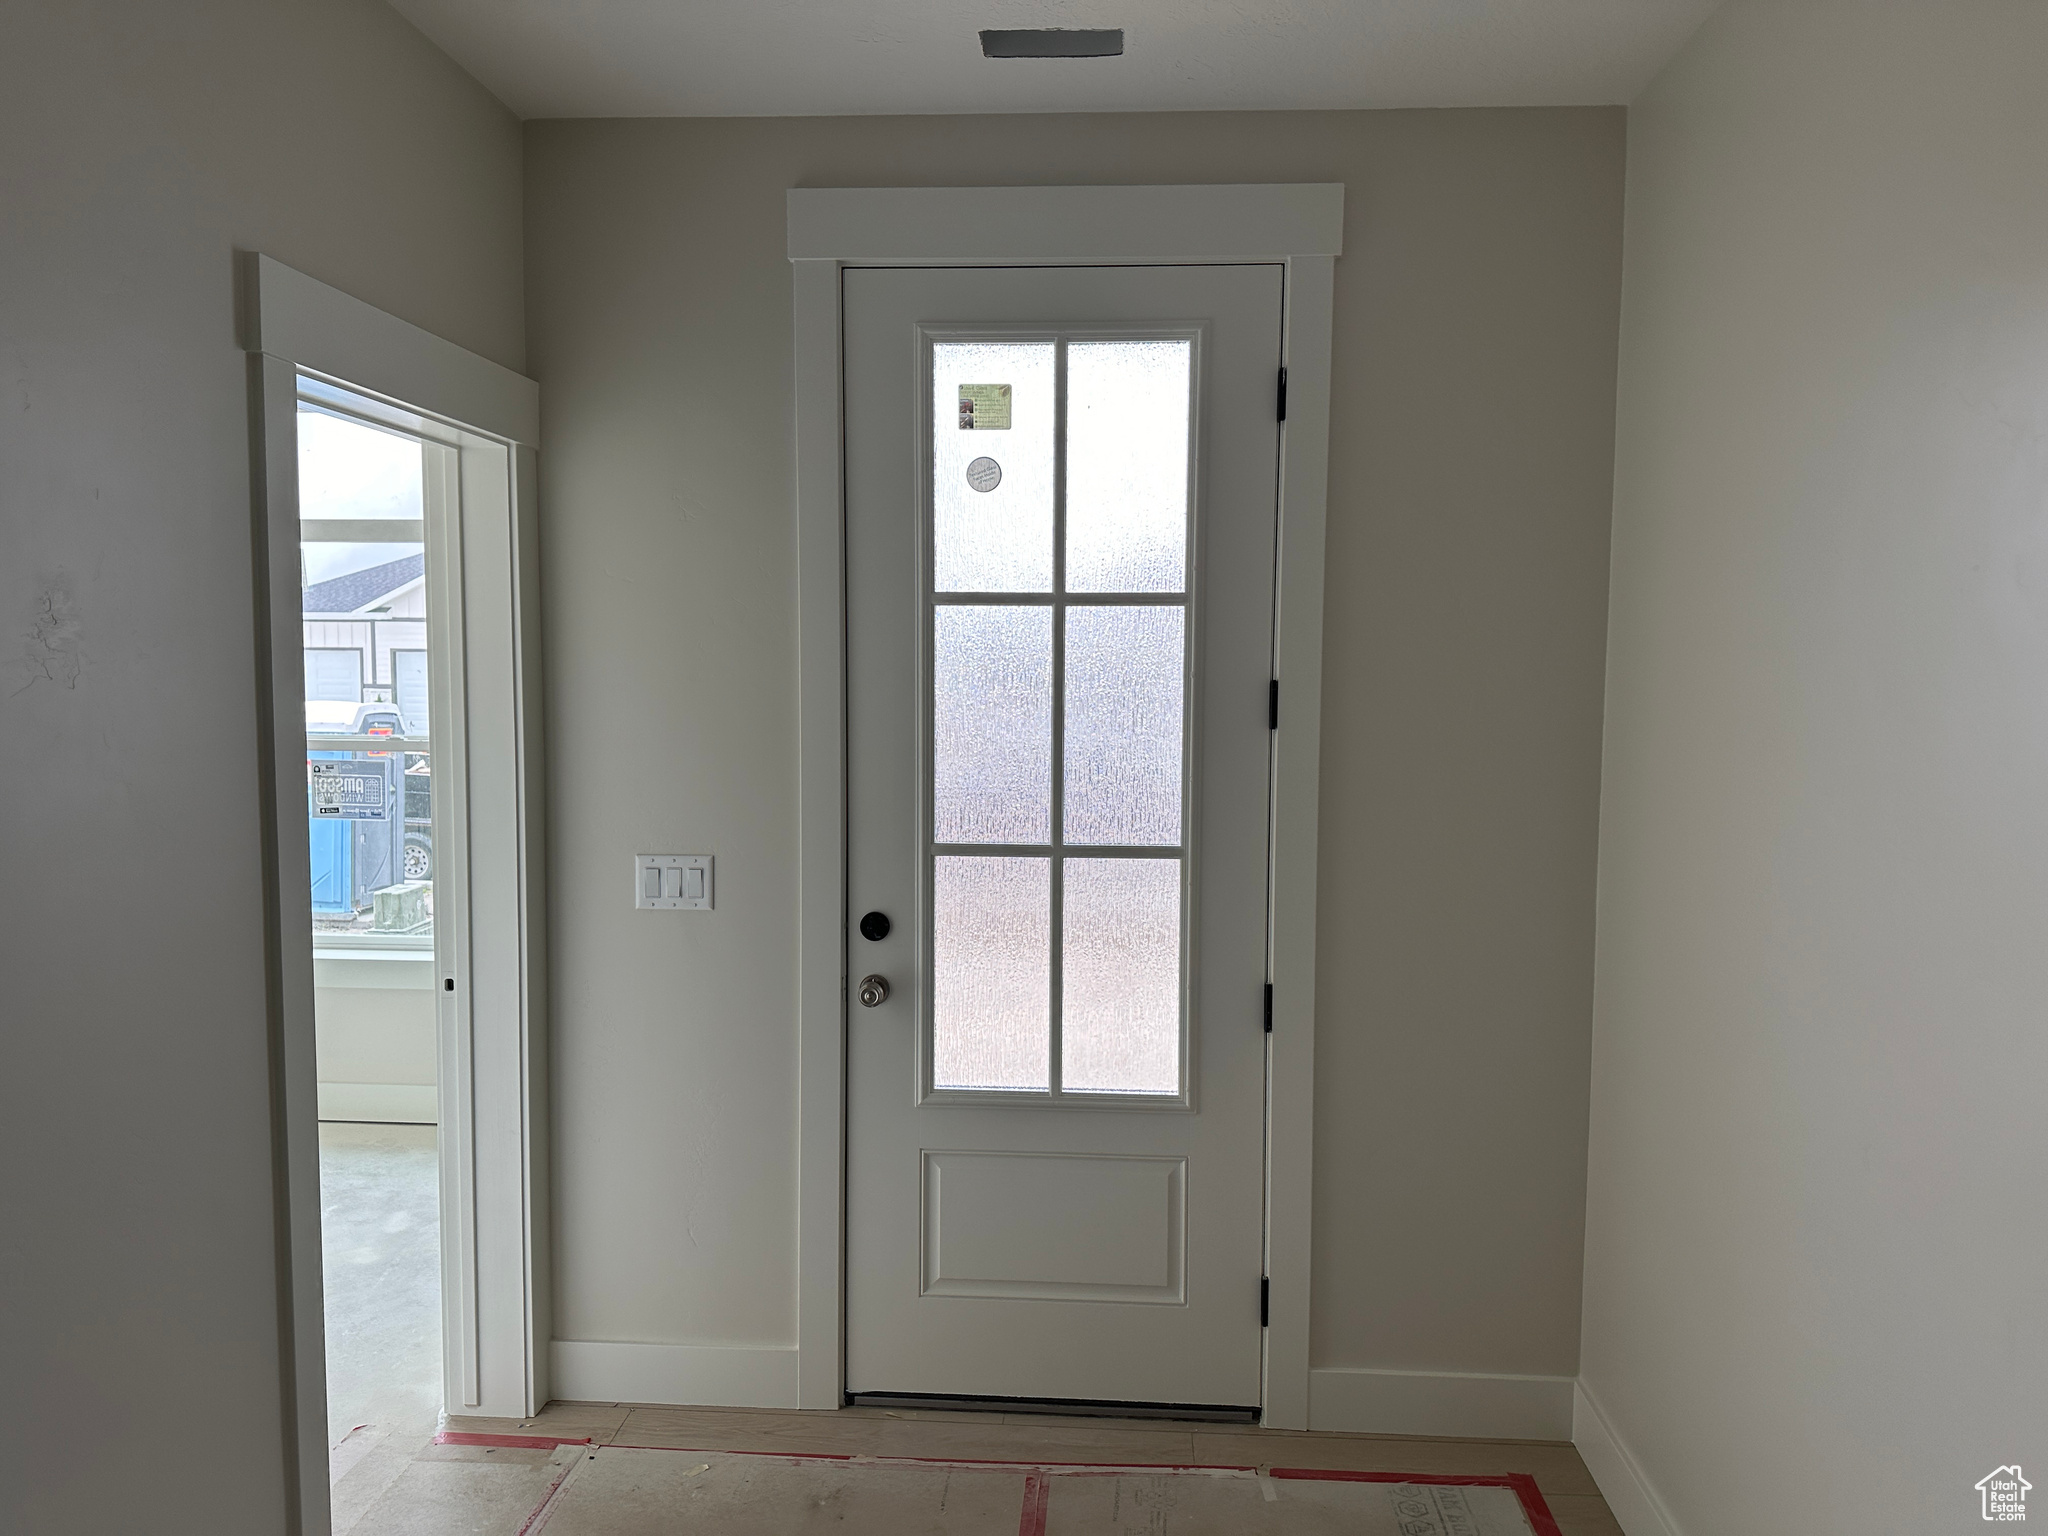 Doorway to outside with a wealth of natural light